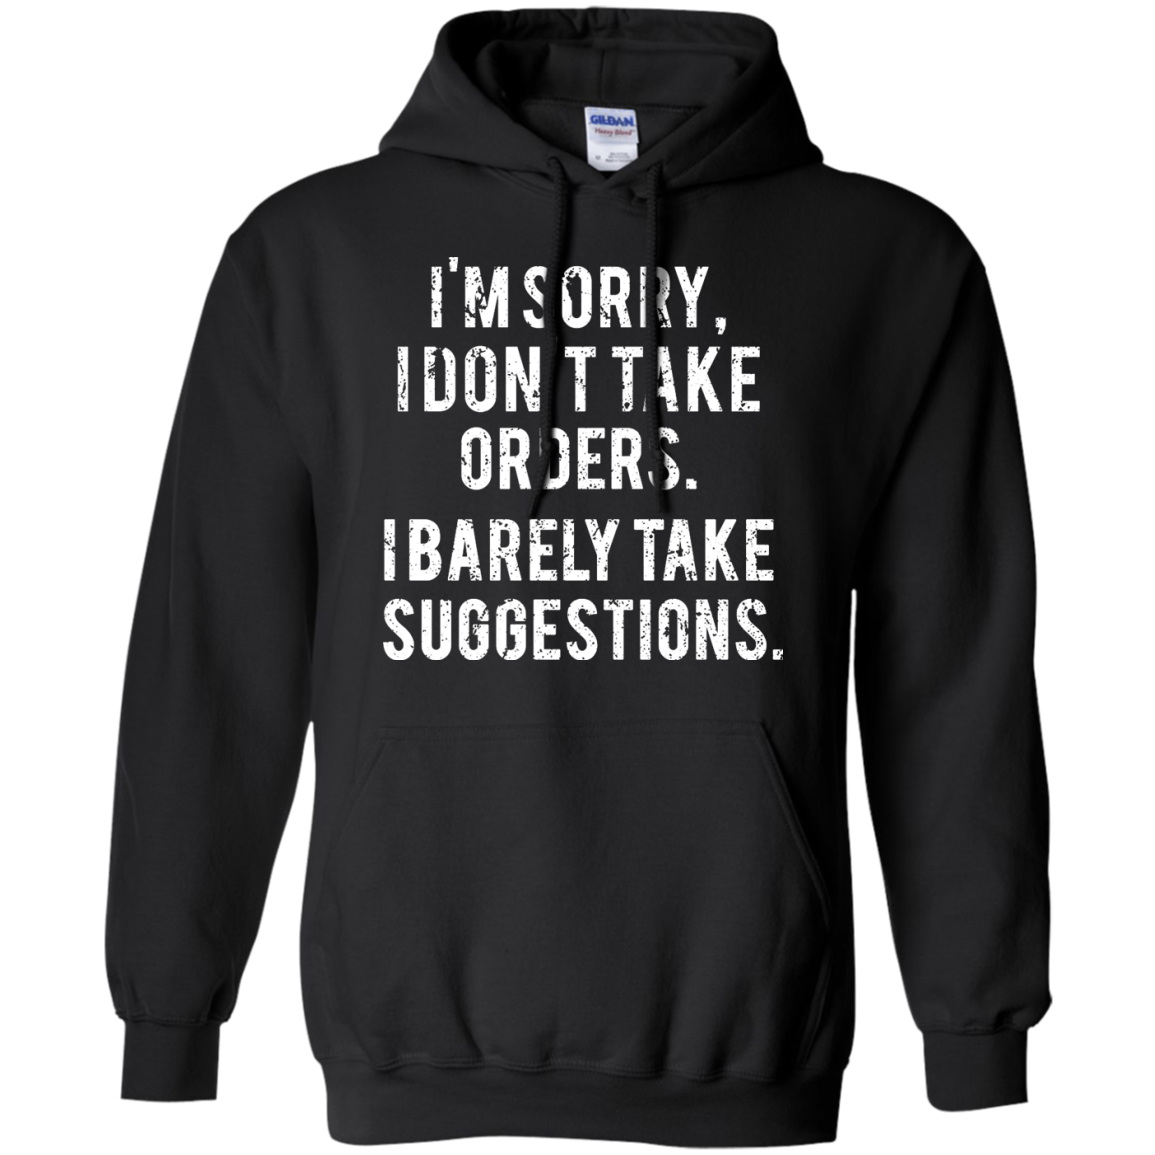 Funny Shirts - I am sorry I don't take orders I barely take suggestions ...